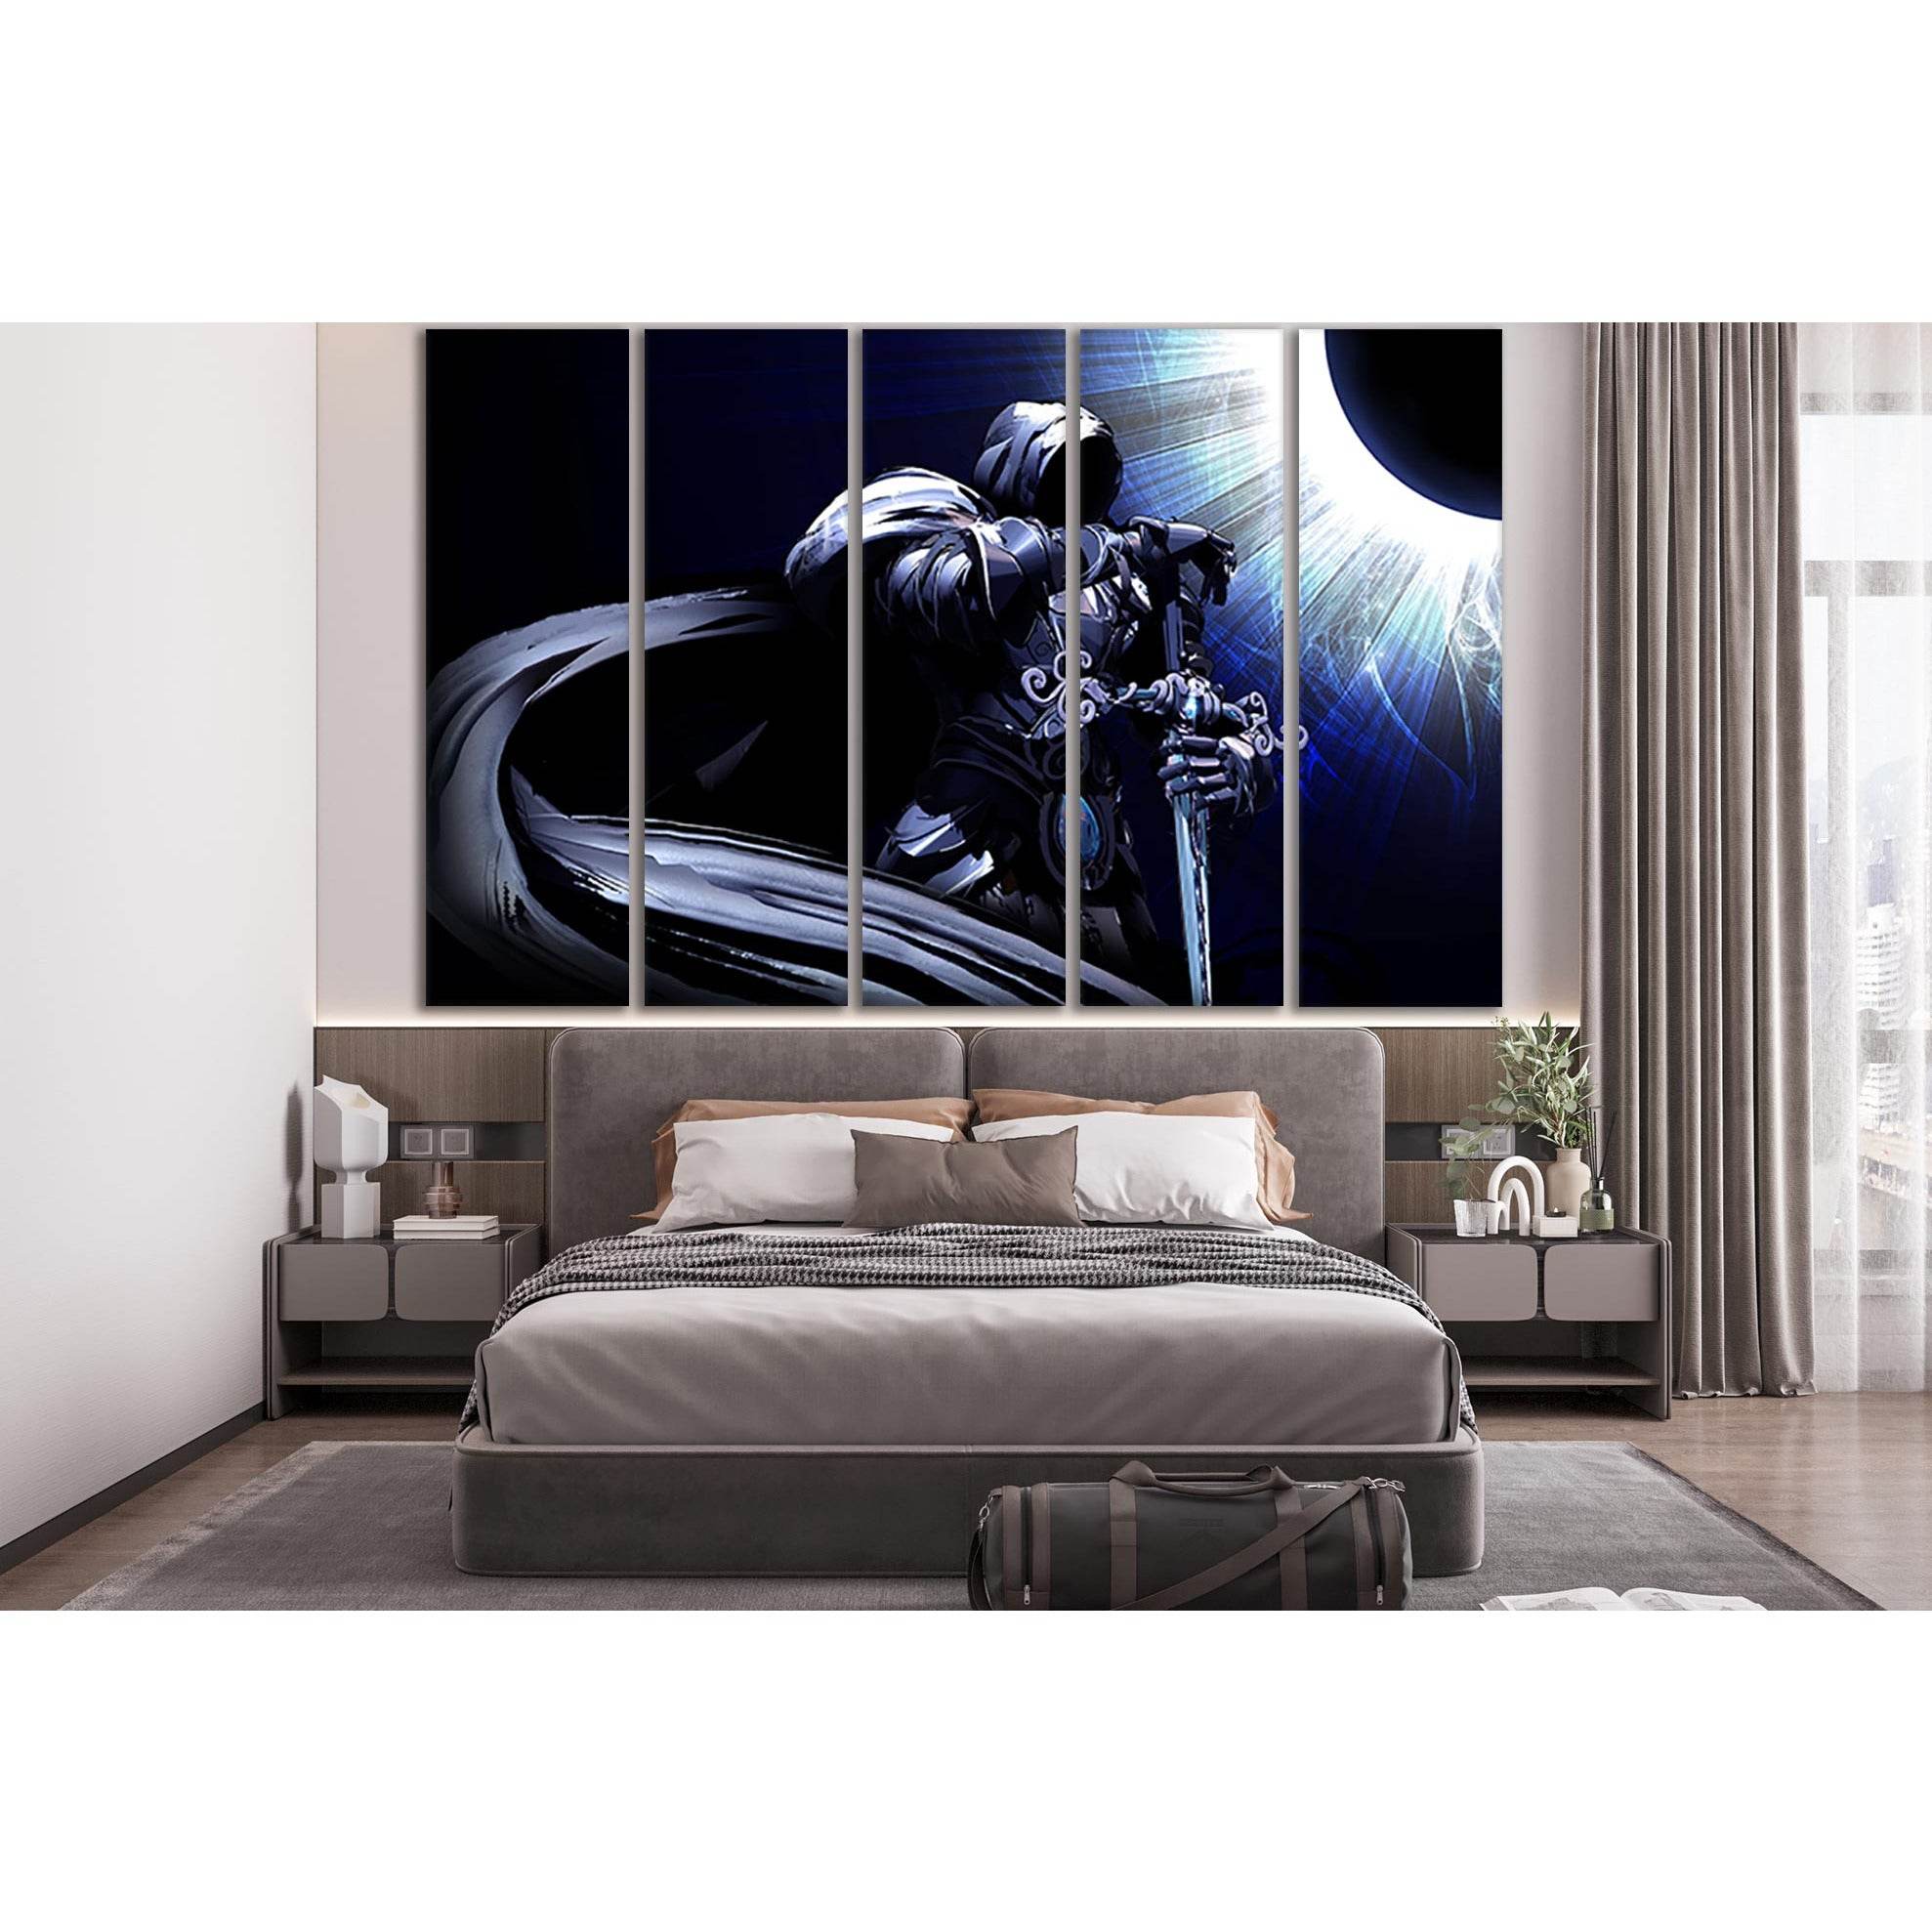 Knight With A Long Cloak №SL1216 Ready to Hang Canvas Print